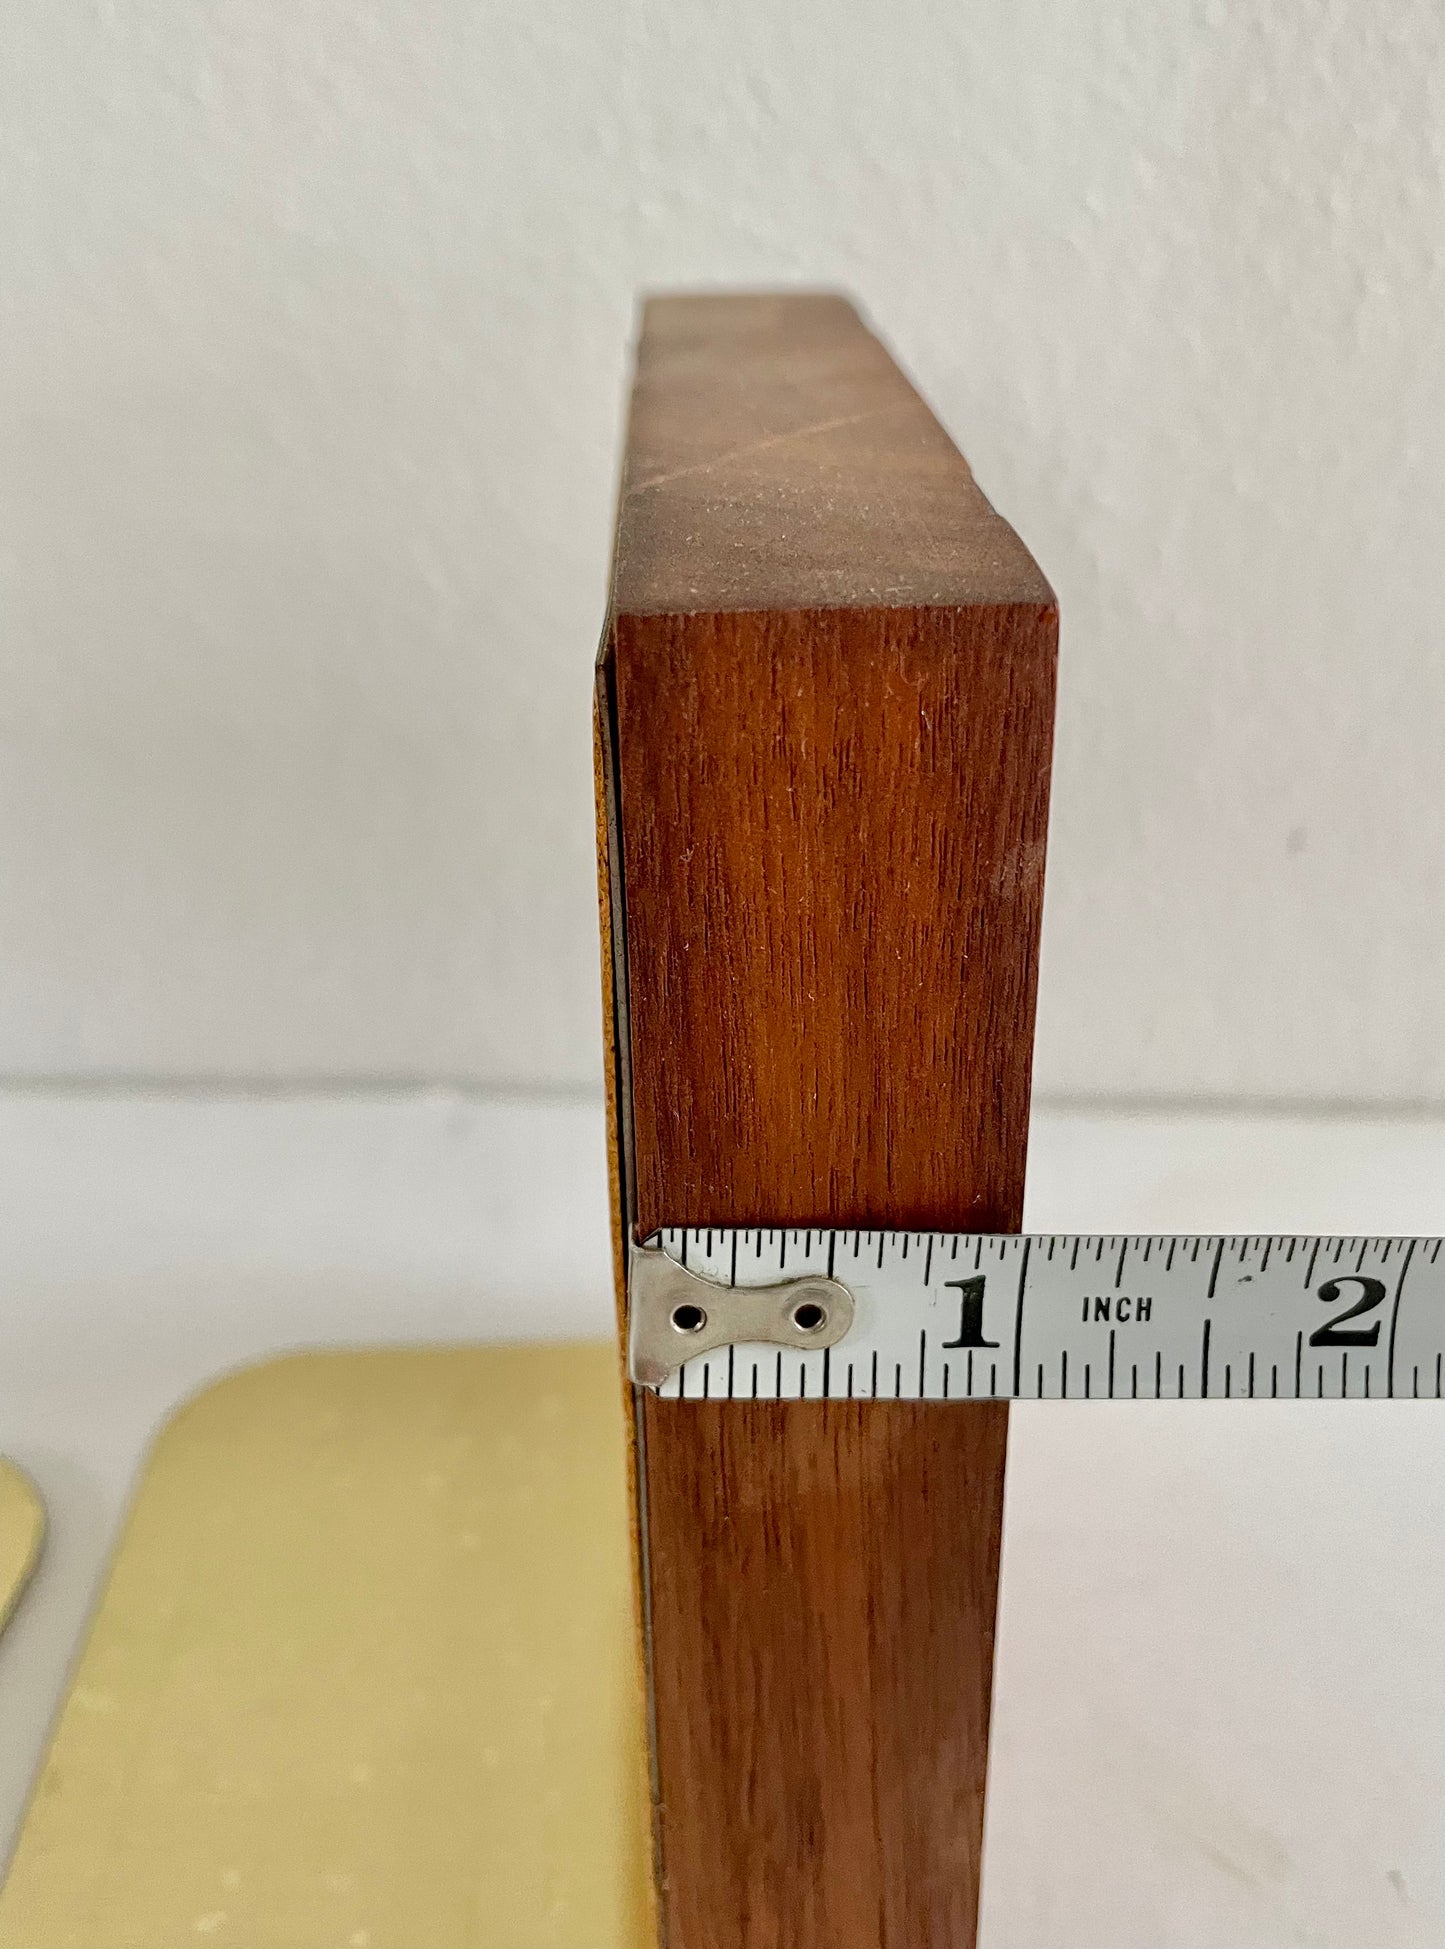 Vintage Mid Century Walnut Bookends by Park Sherman - a Pair